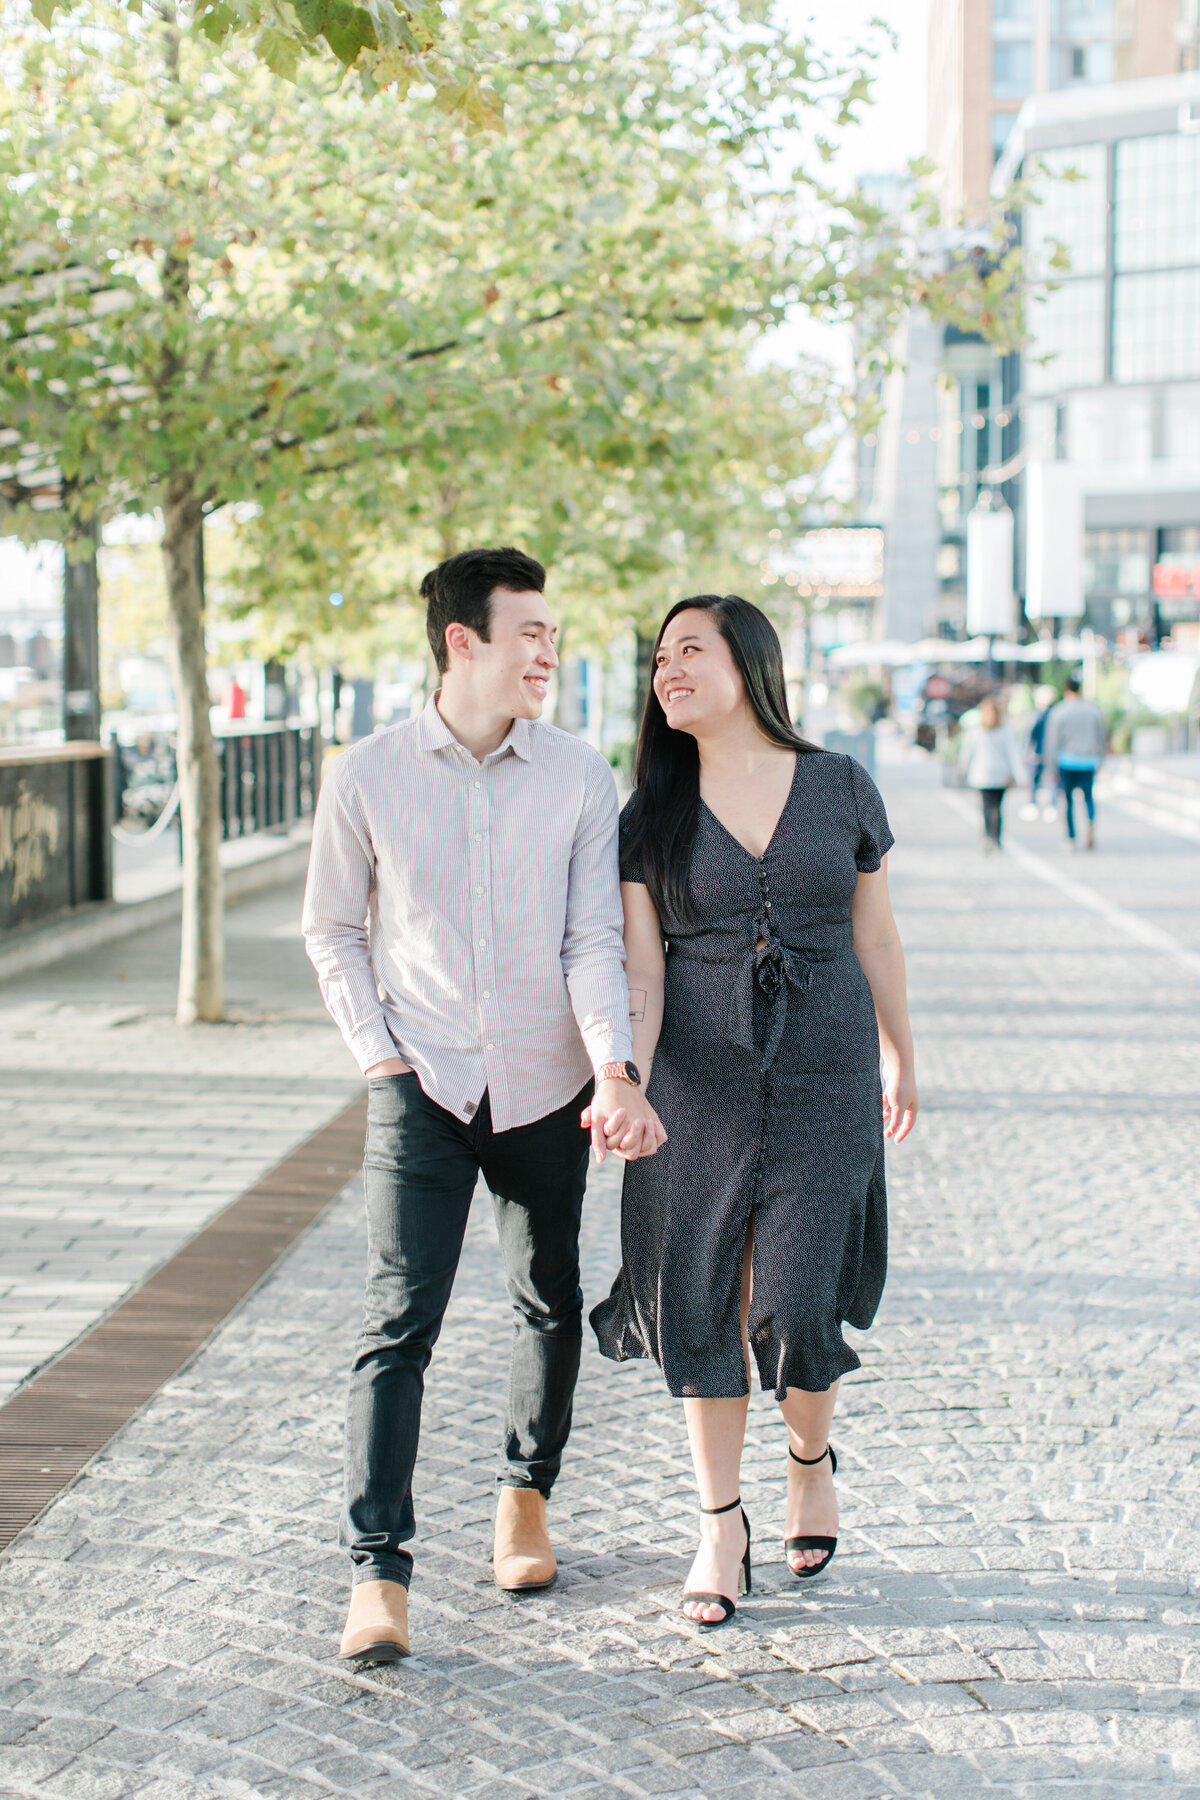 Becky_Collin_Navy_Yards_Park_The_Wharf_Washington_DC_Fall_Engagement_Session_AngelikaJohnsPhotography-7573